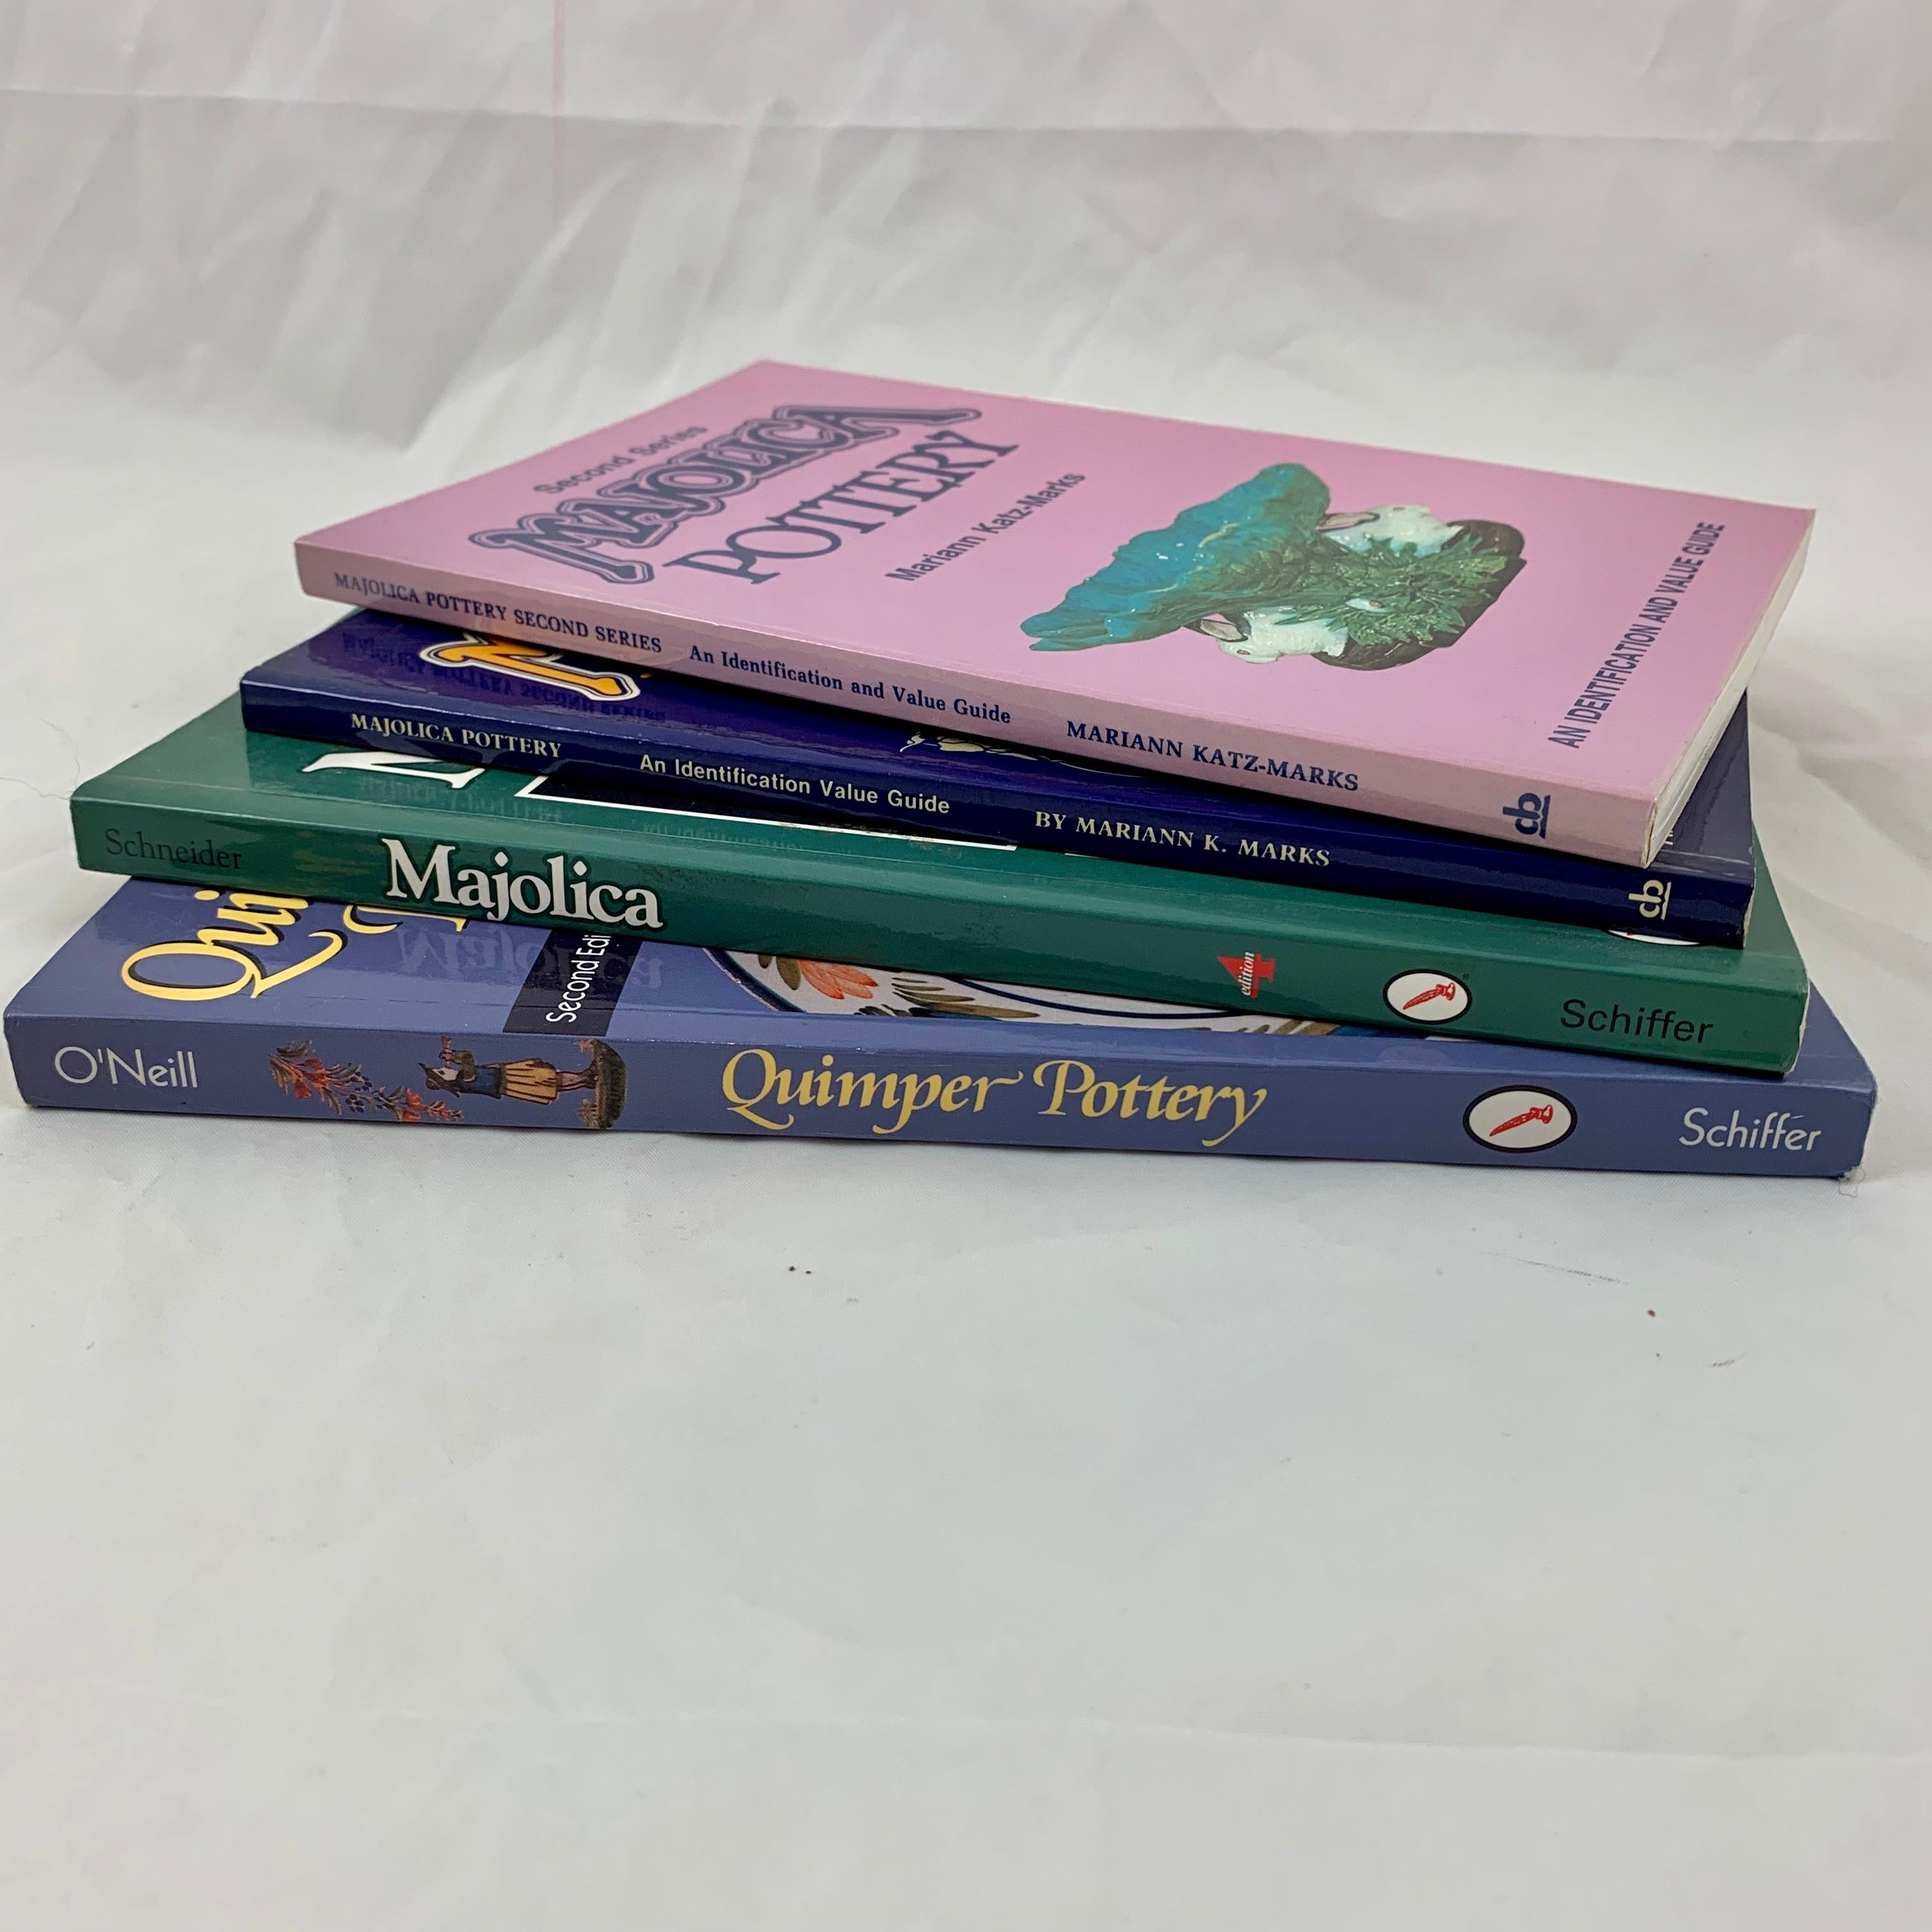 A group of four soft-bound, full-color collector's reference books, three books on English, Continental, and American Majolica and one book covering French Quimper pottery. They are a valuable, in-depth and informative reference for both the